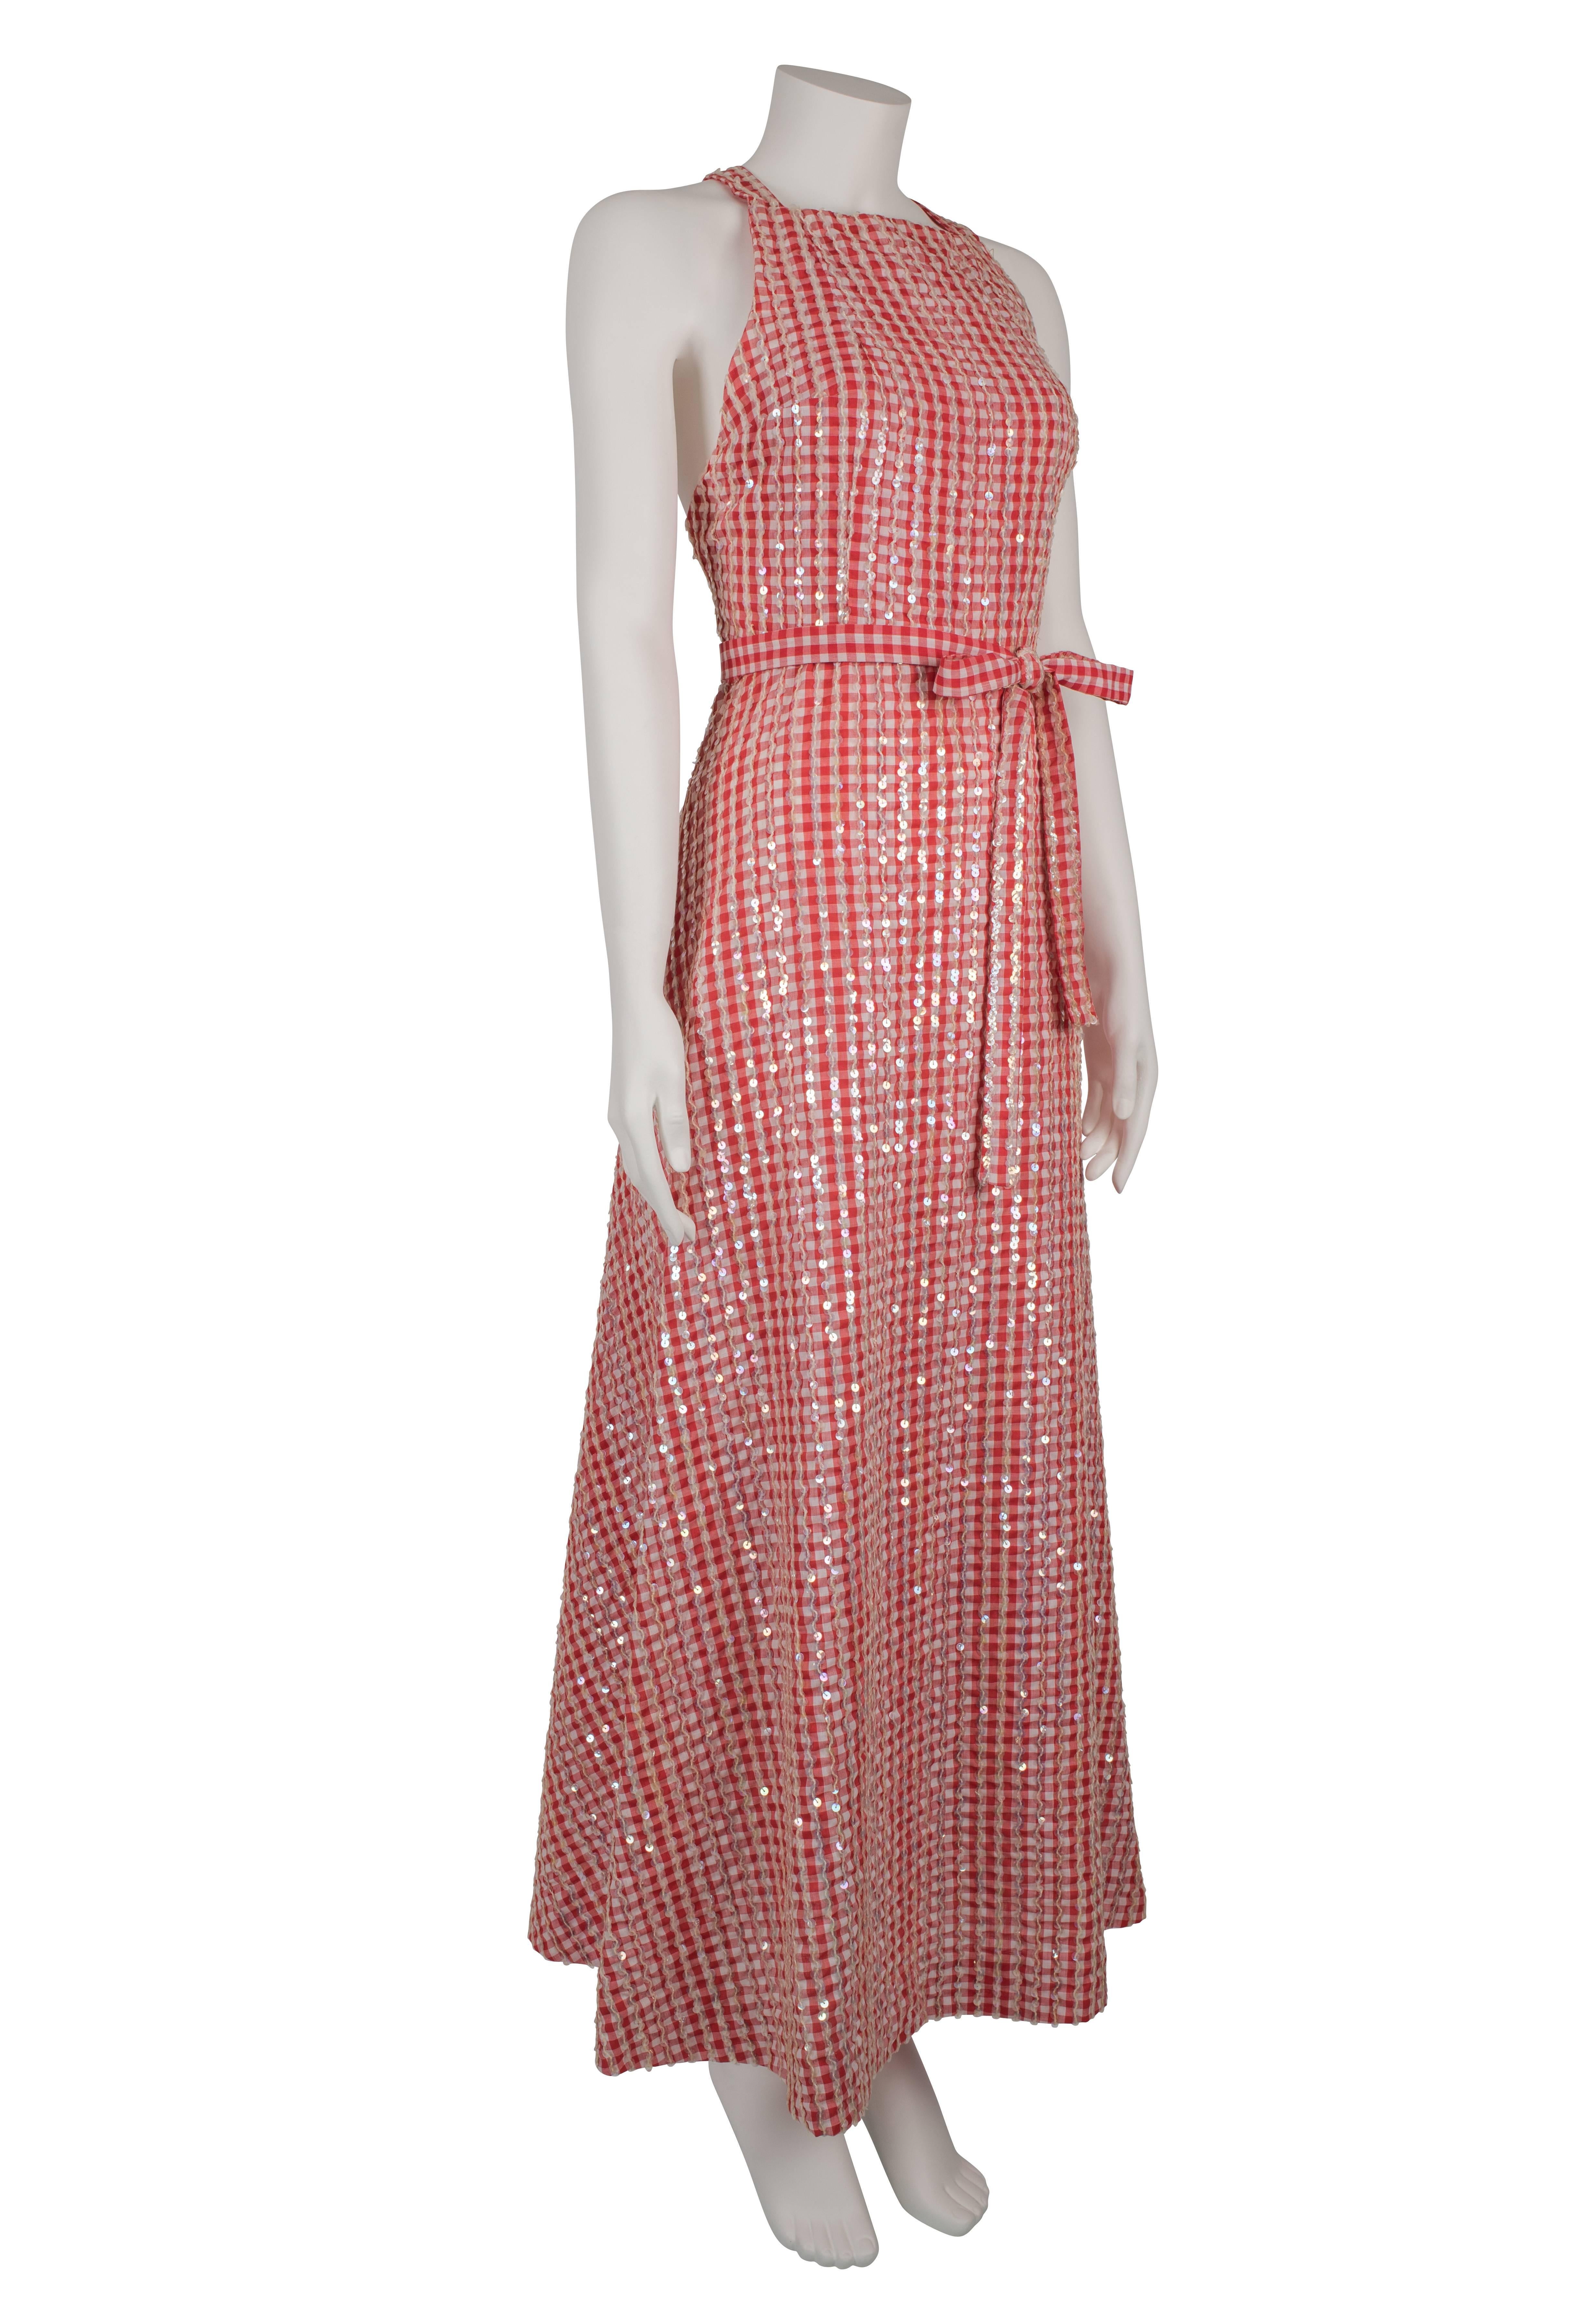 Women's 1970's Anthony Muto Sequinned Red Gingham Dress